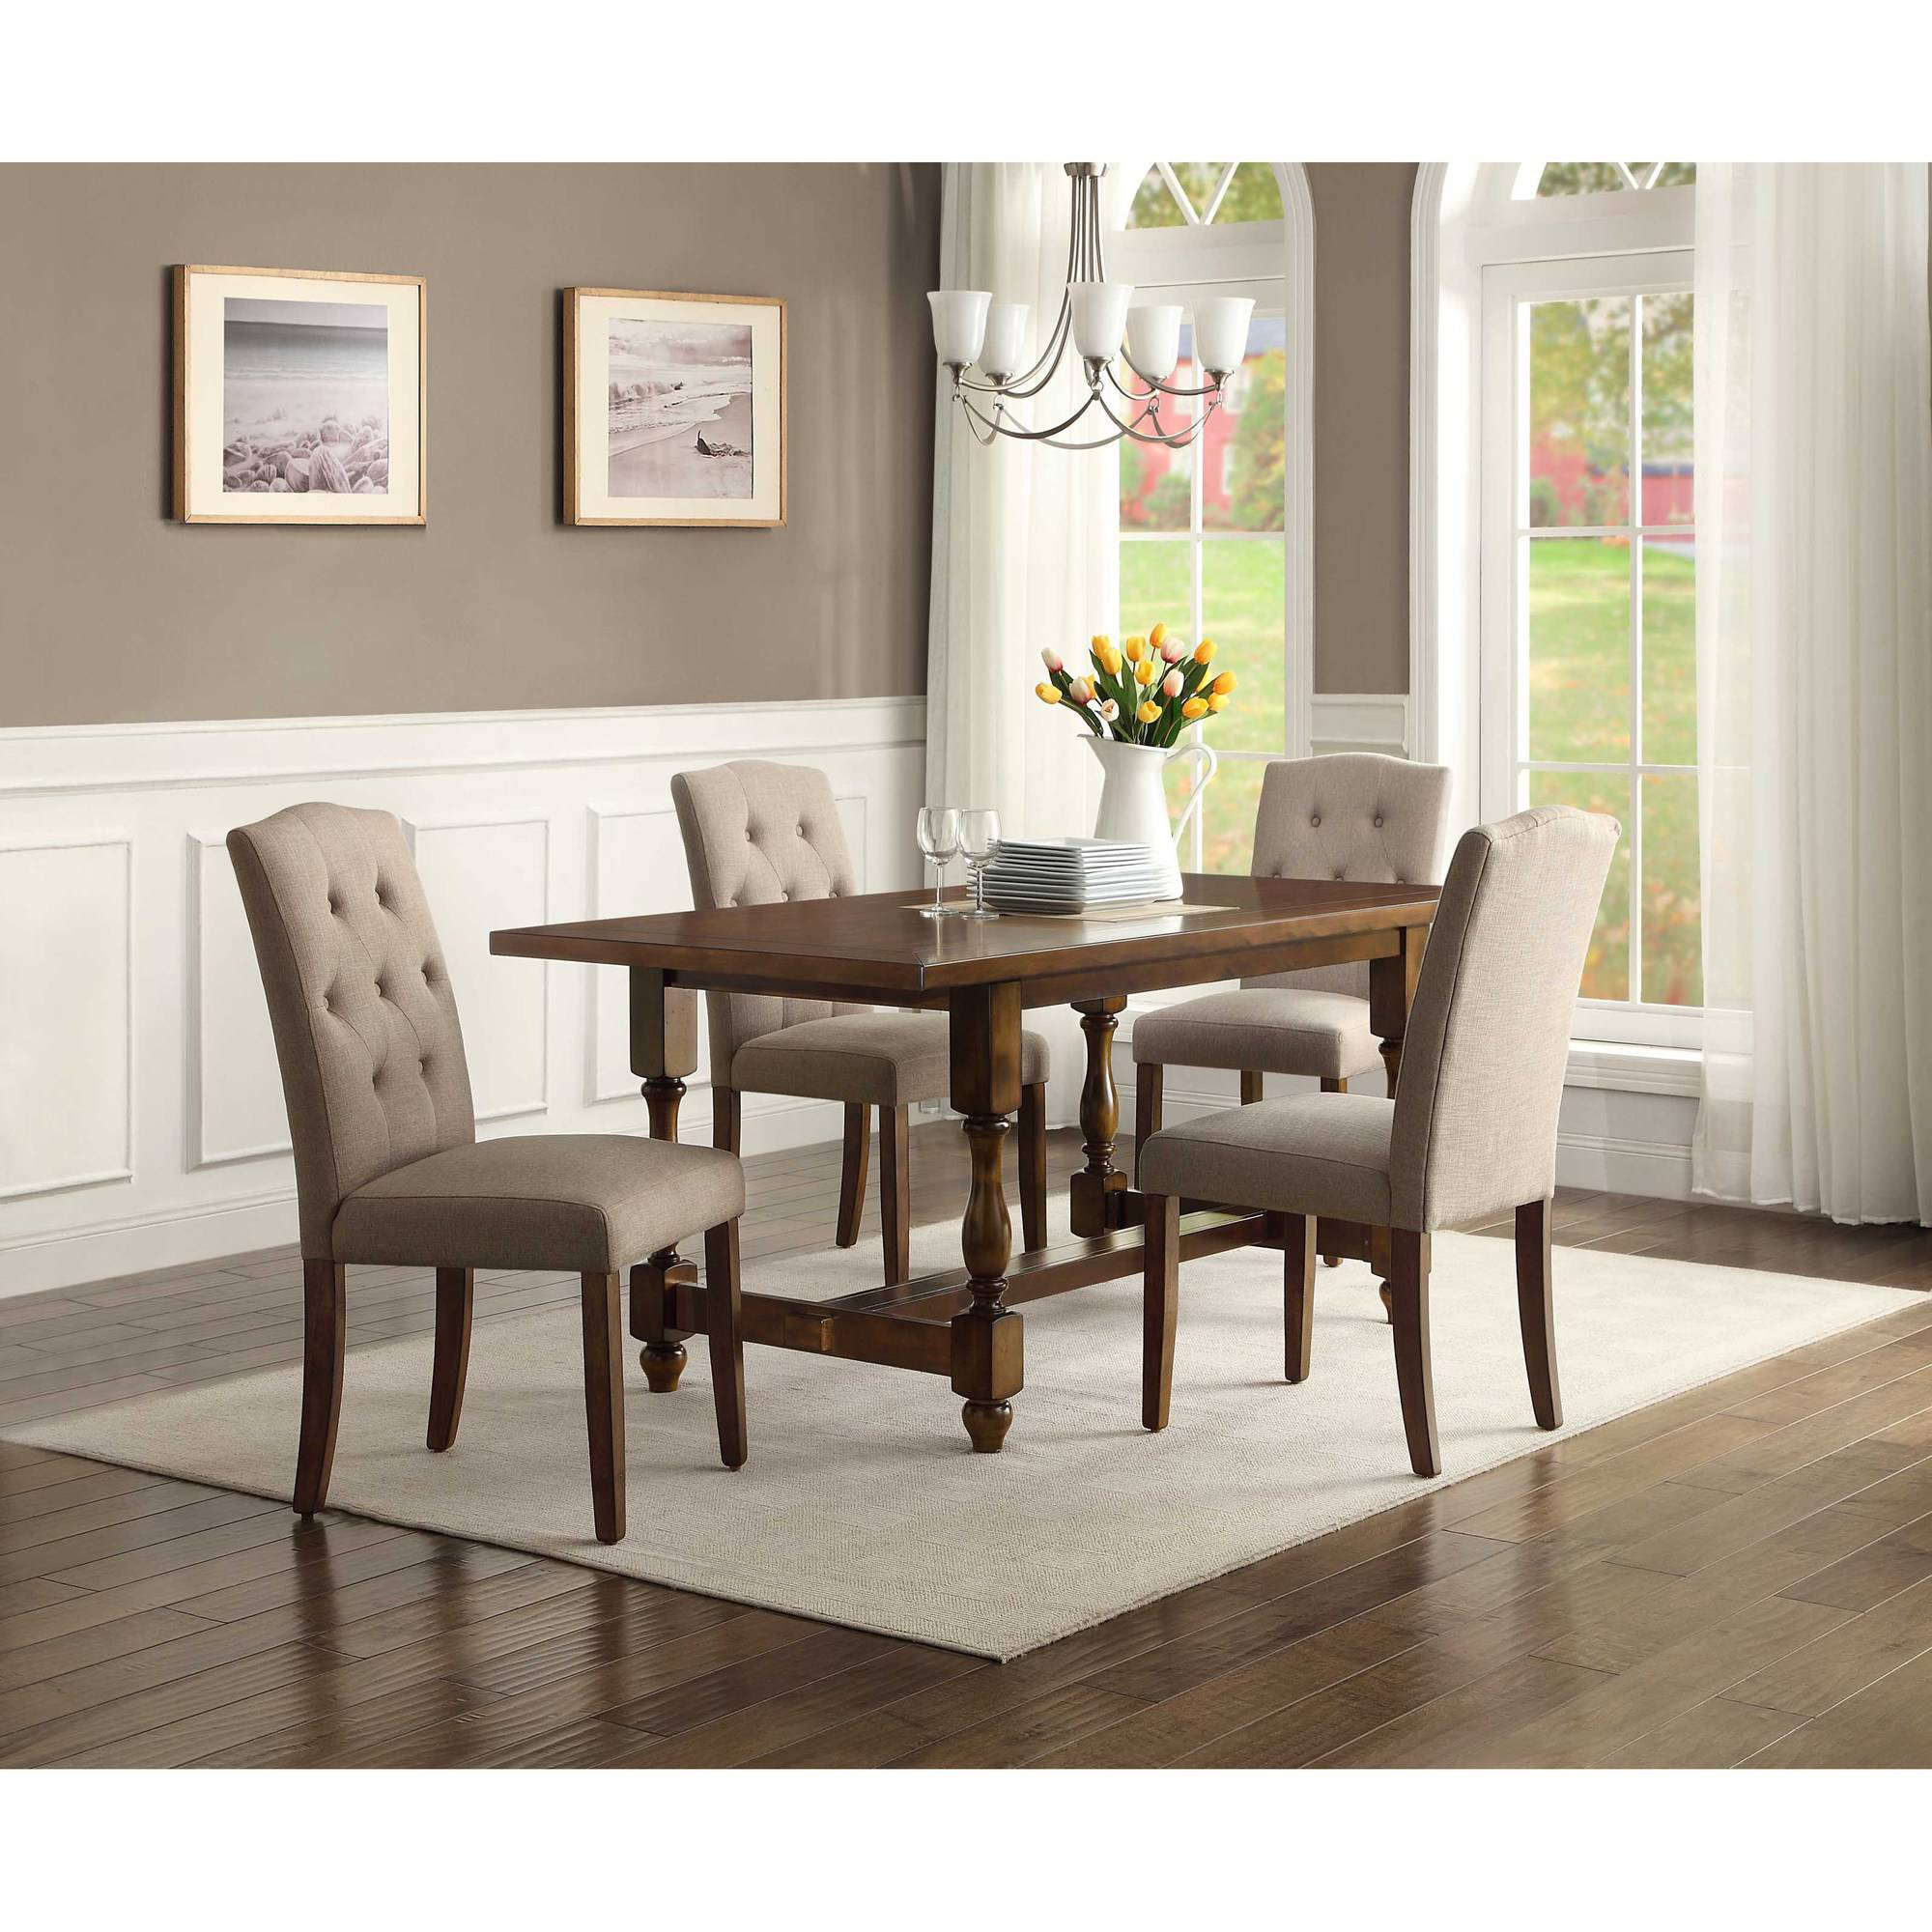 Dining Room Magnificent Sturyd Walmart Dining Set With throughout dimensions 2000 X 2000